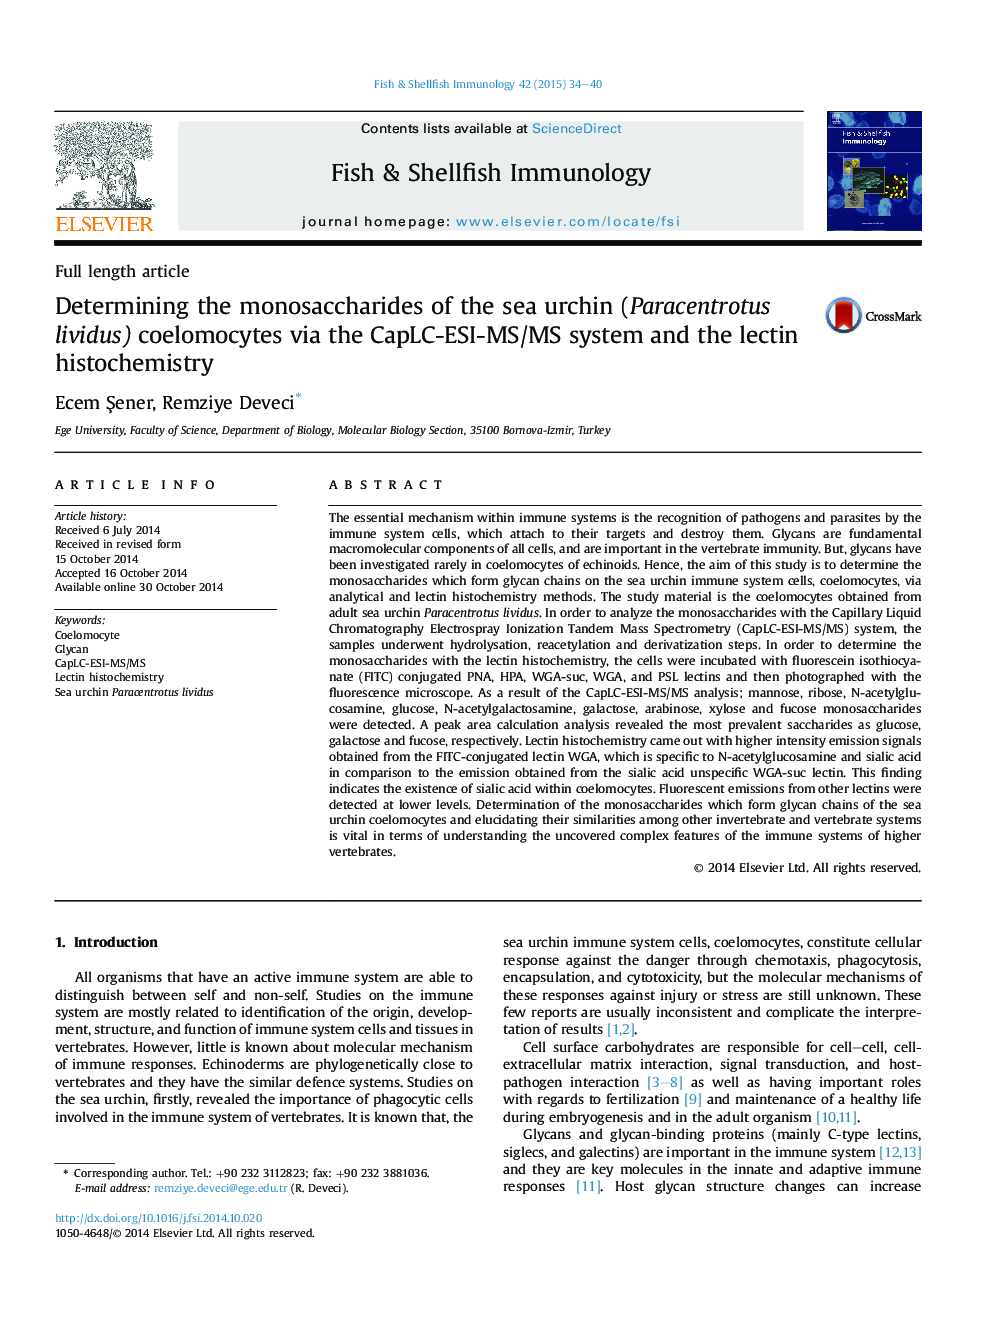 Determining the monosaccharides of the sea urchin (Paracentrotus lividus) coelomocytes via the CapLC-ESI-MS/MS system and the lectin histochemistry